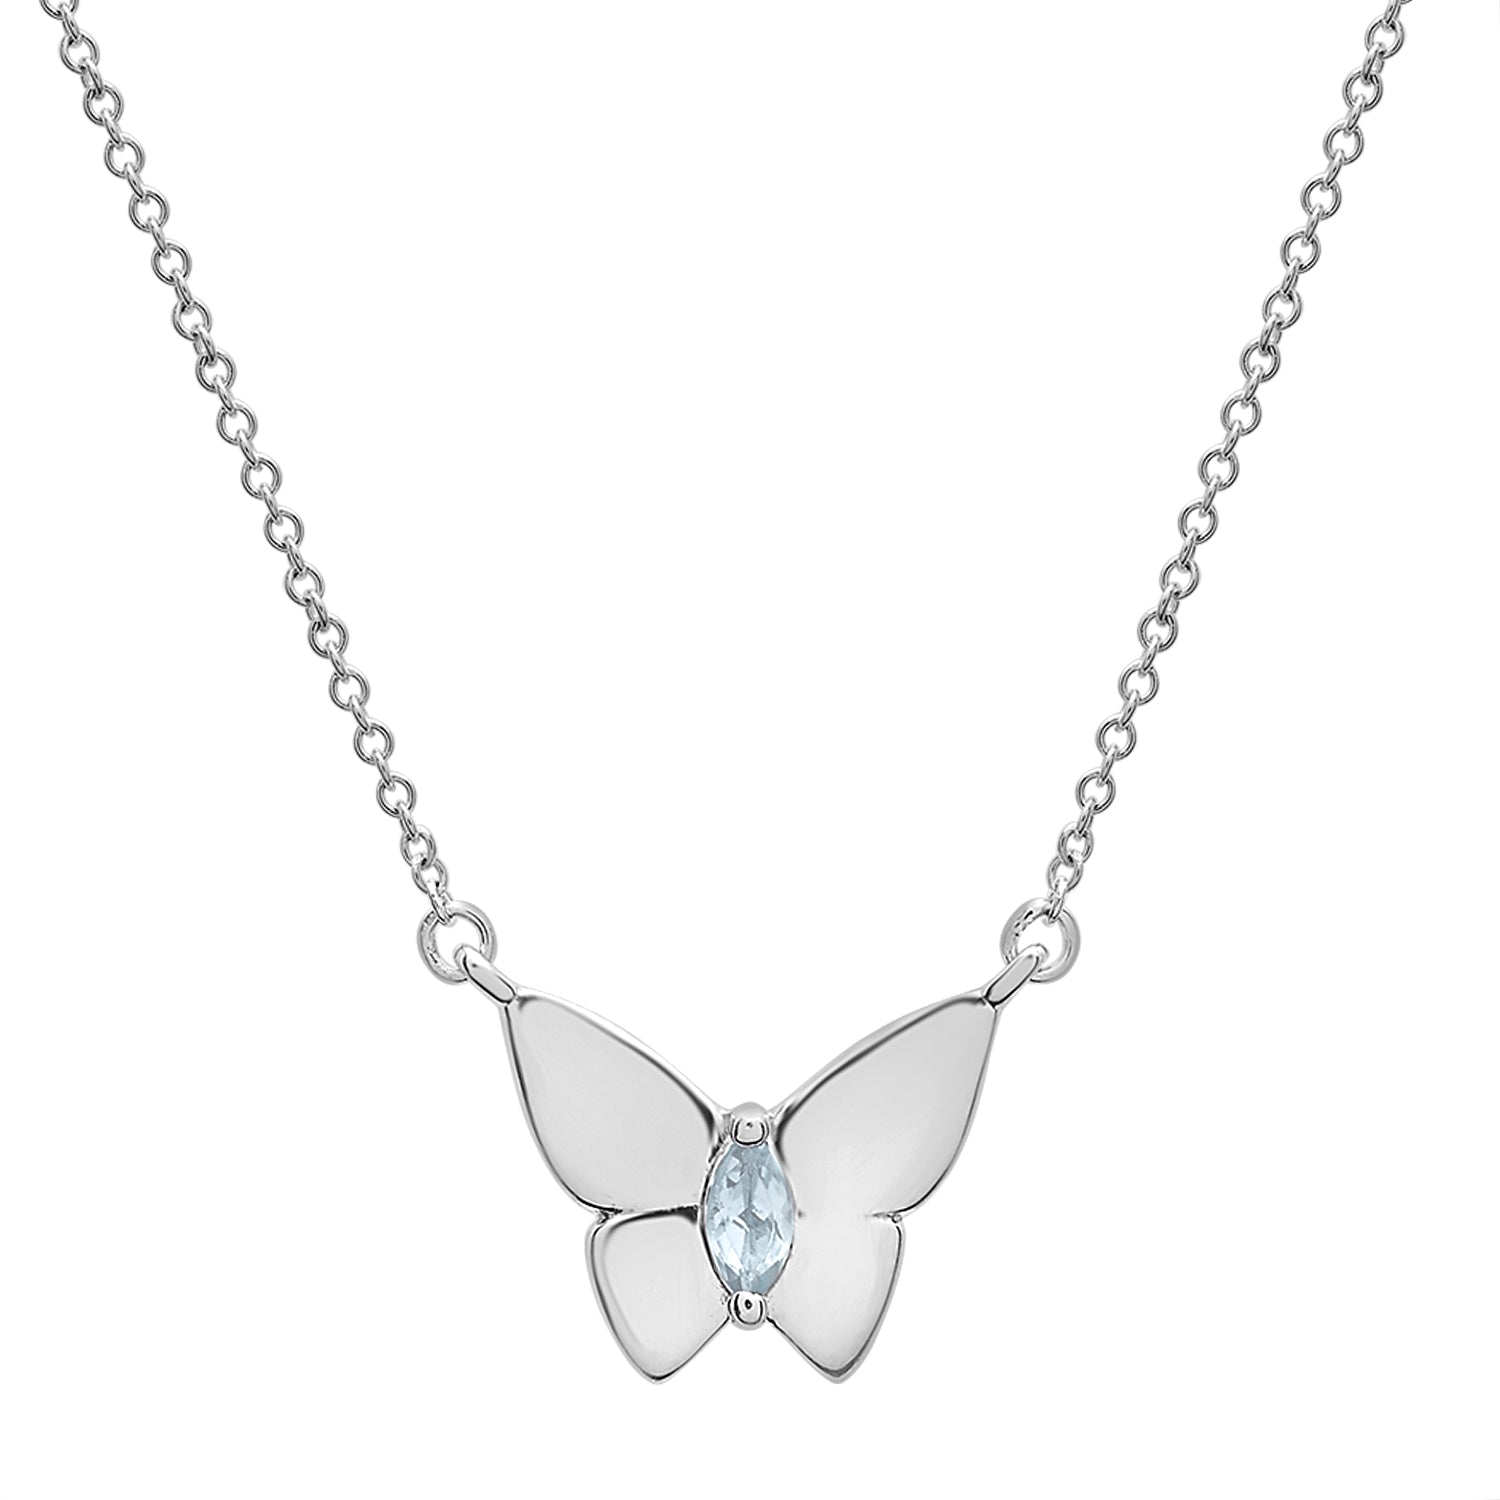 Gray Stone Butterfly Birthstone Necklace with Silver chain